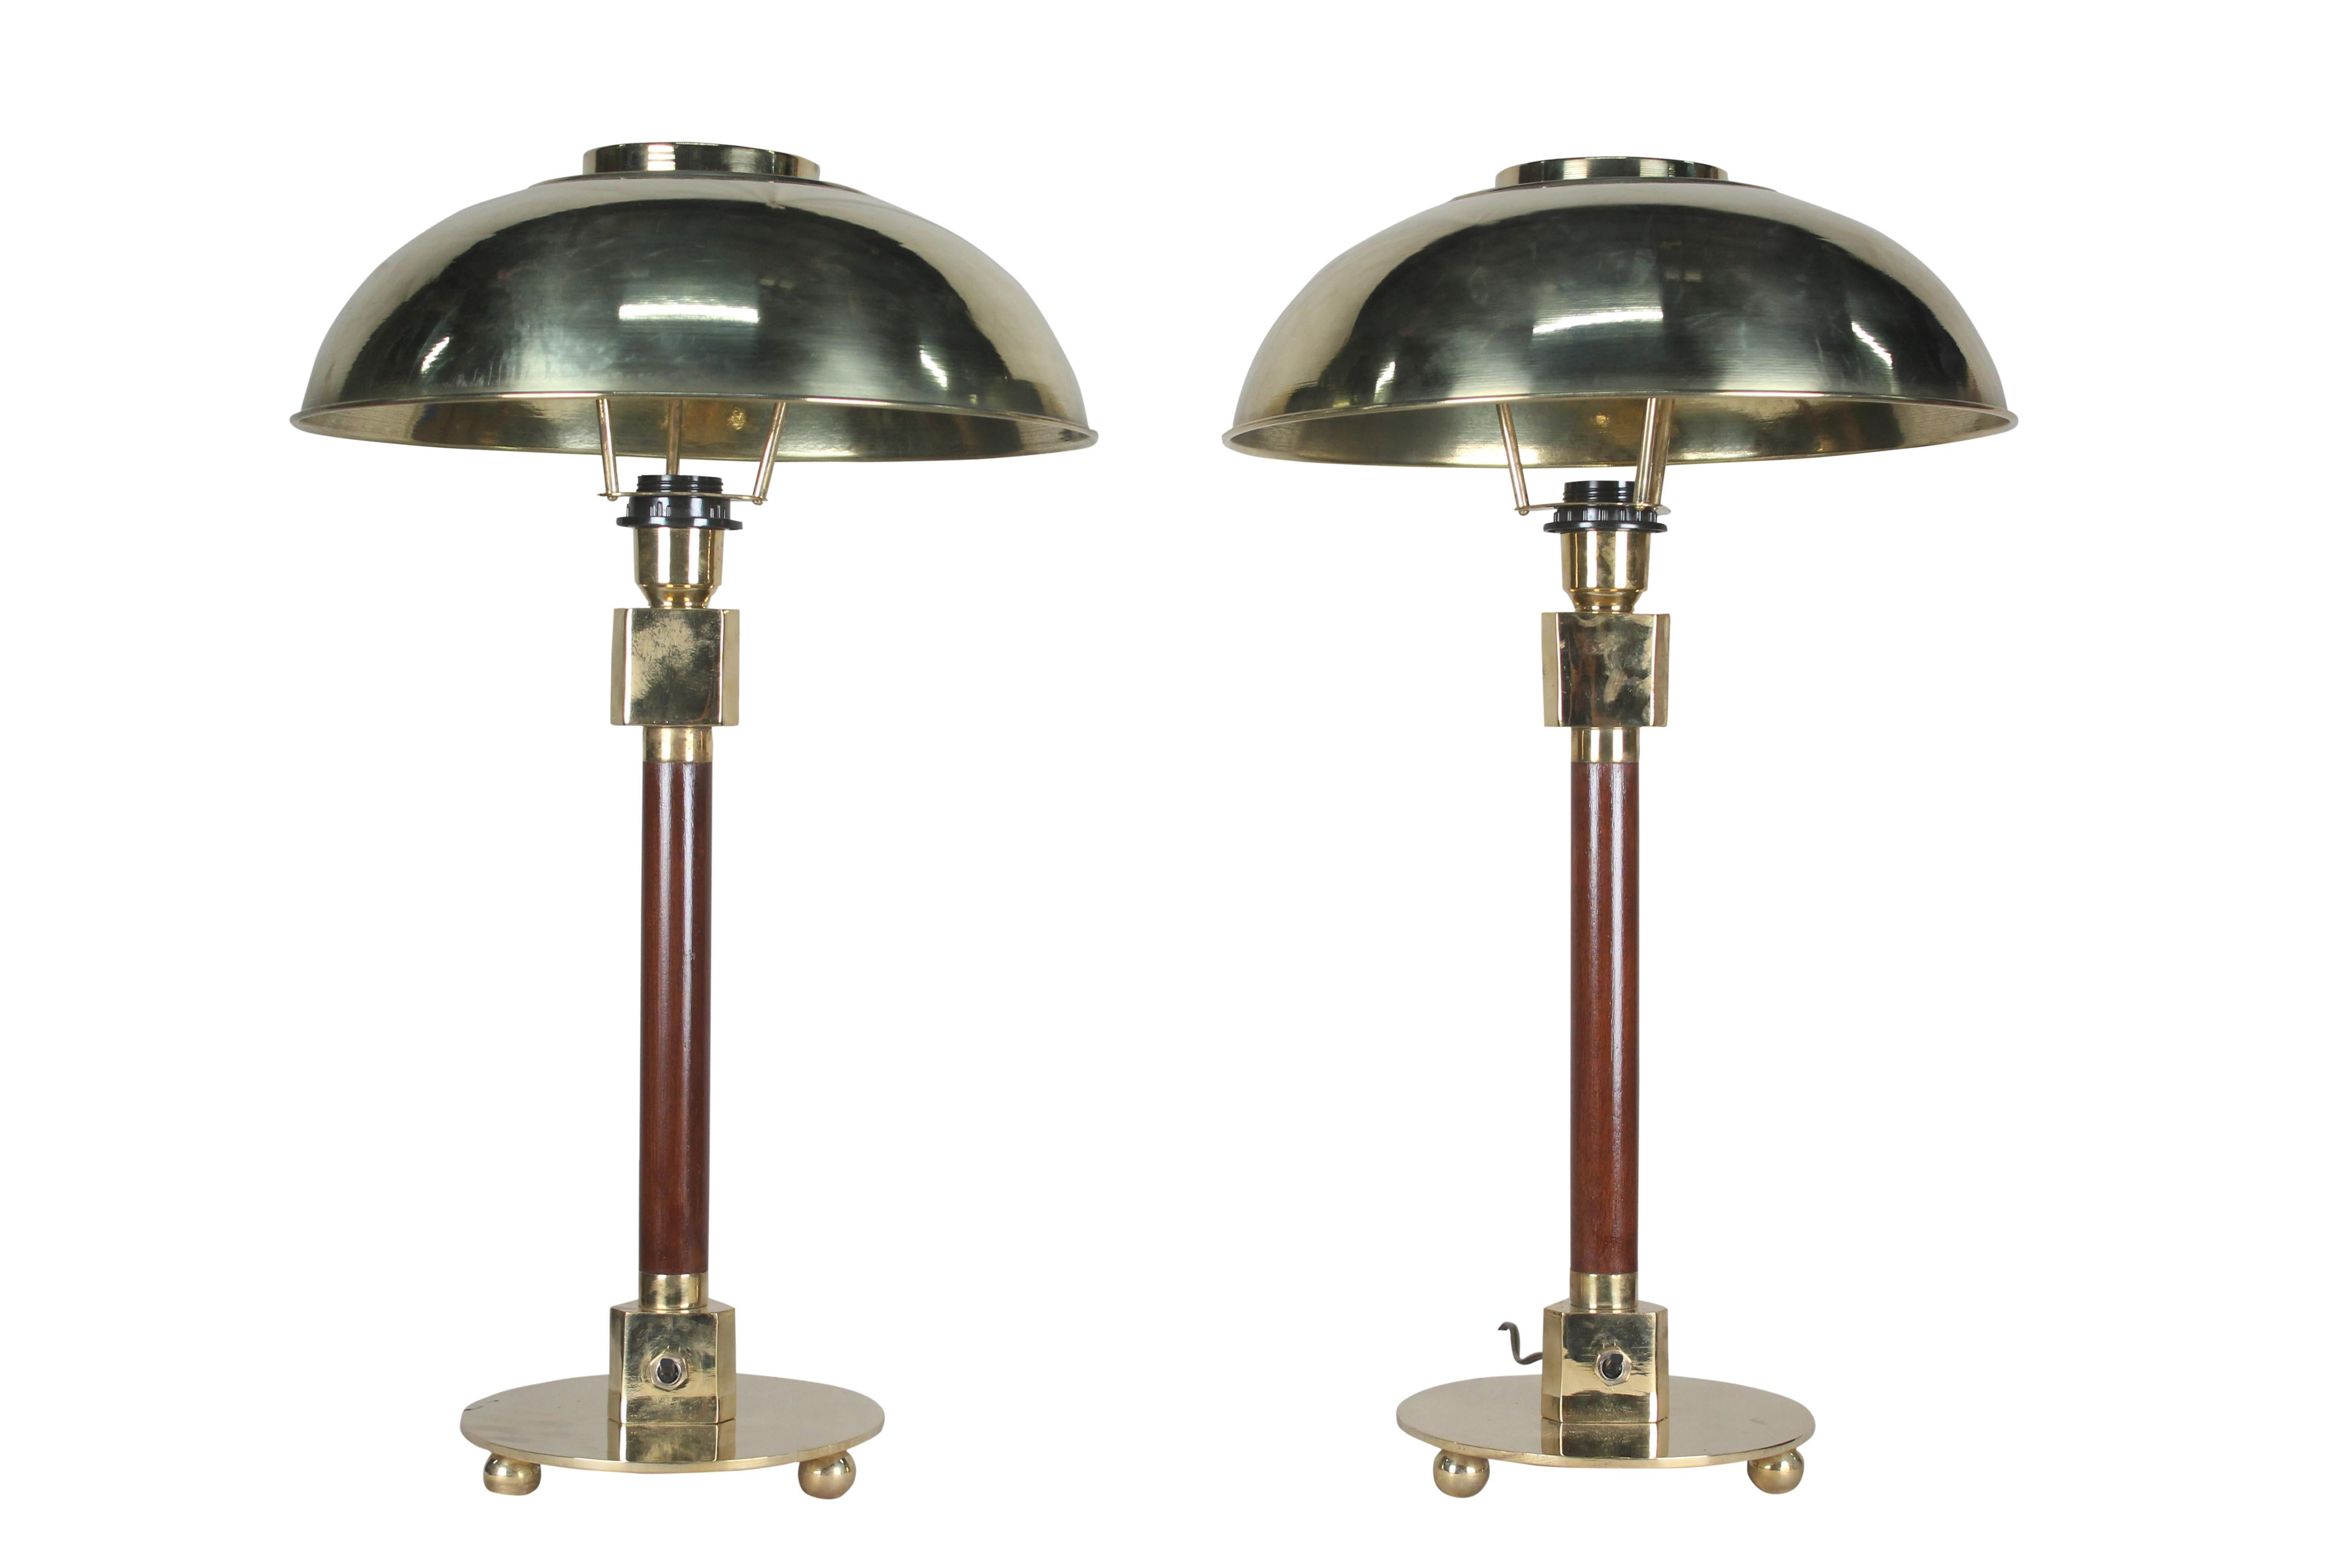 Pair of teak and brass table lamps from a ship's stateroom. Domed brass shade which lifts off and lamps are rewired for American use and takes one standard base light bulb, circa 1970s. Base diameter is 8